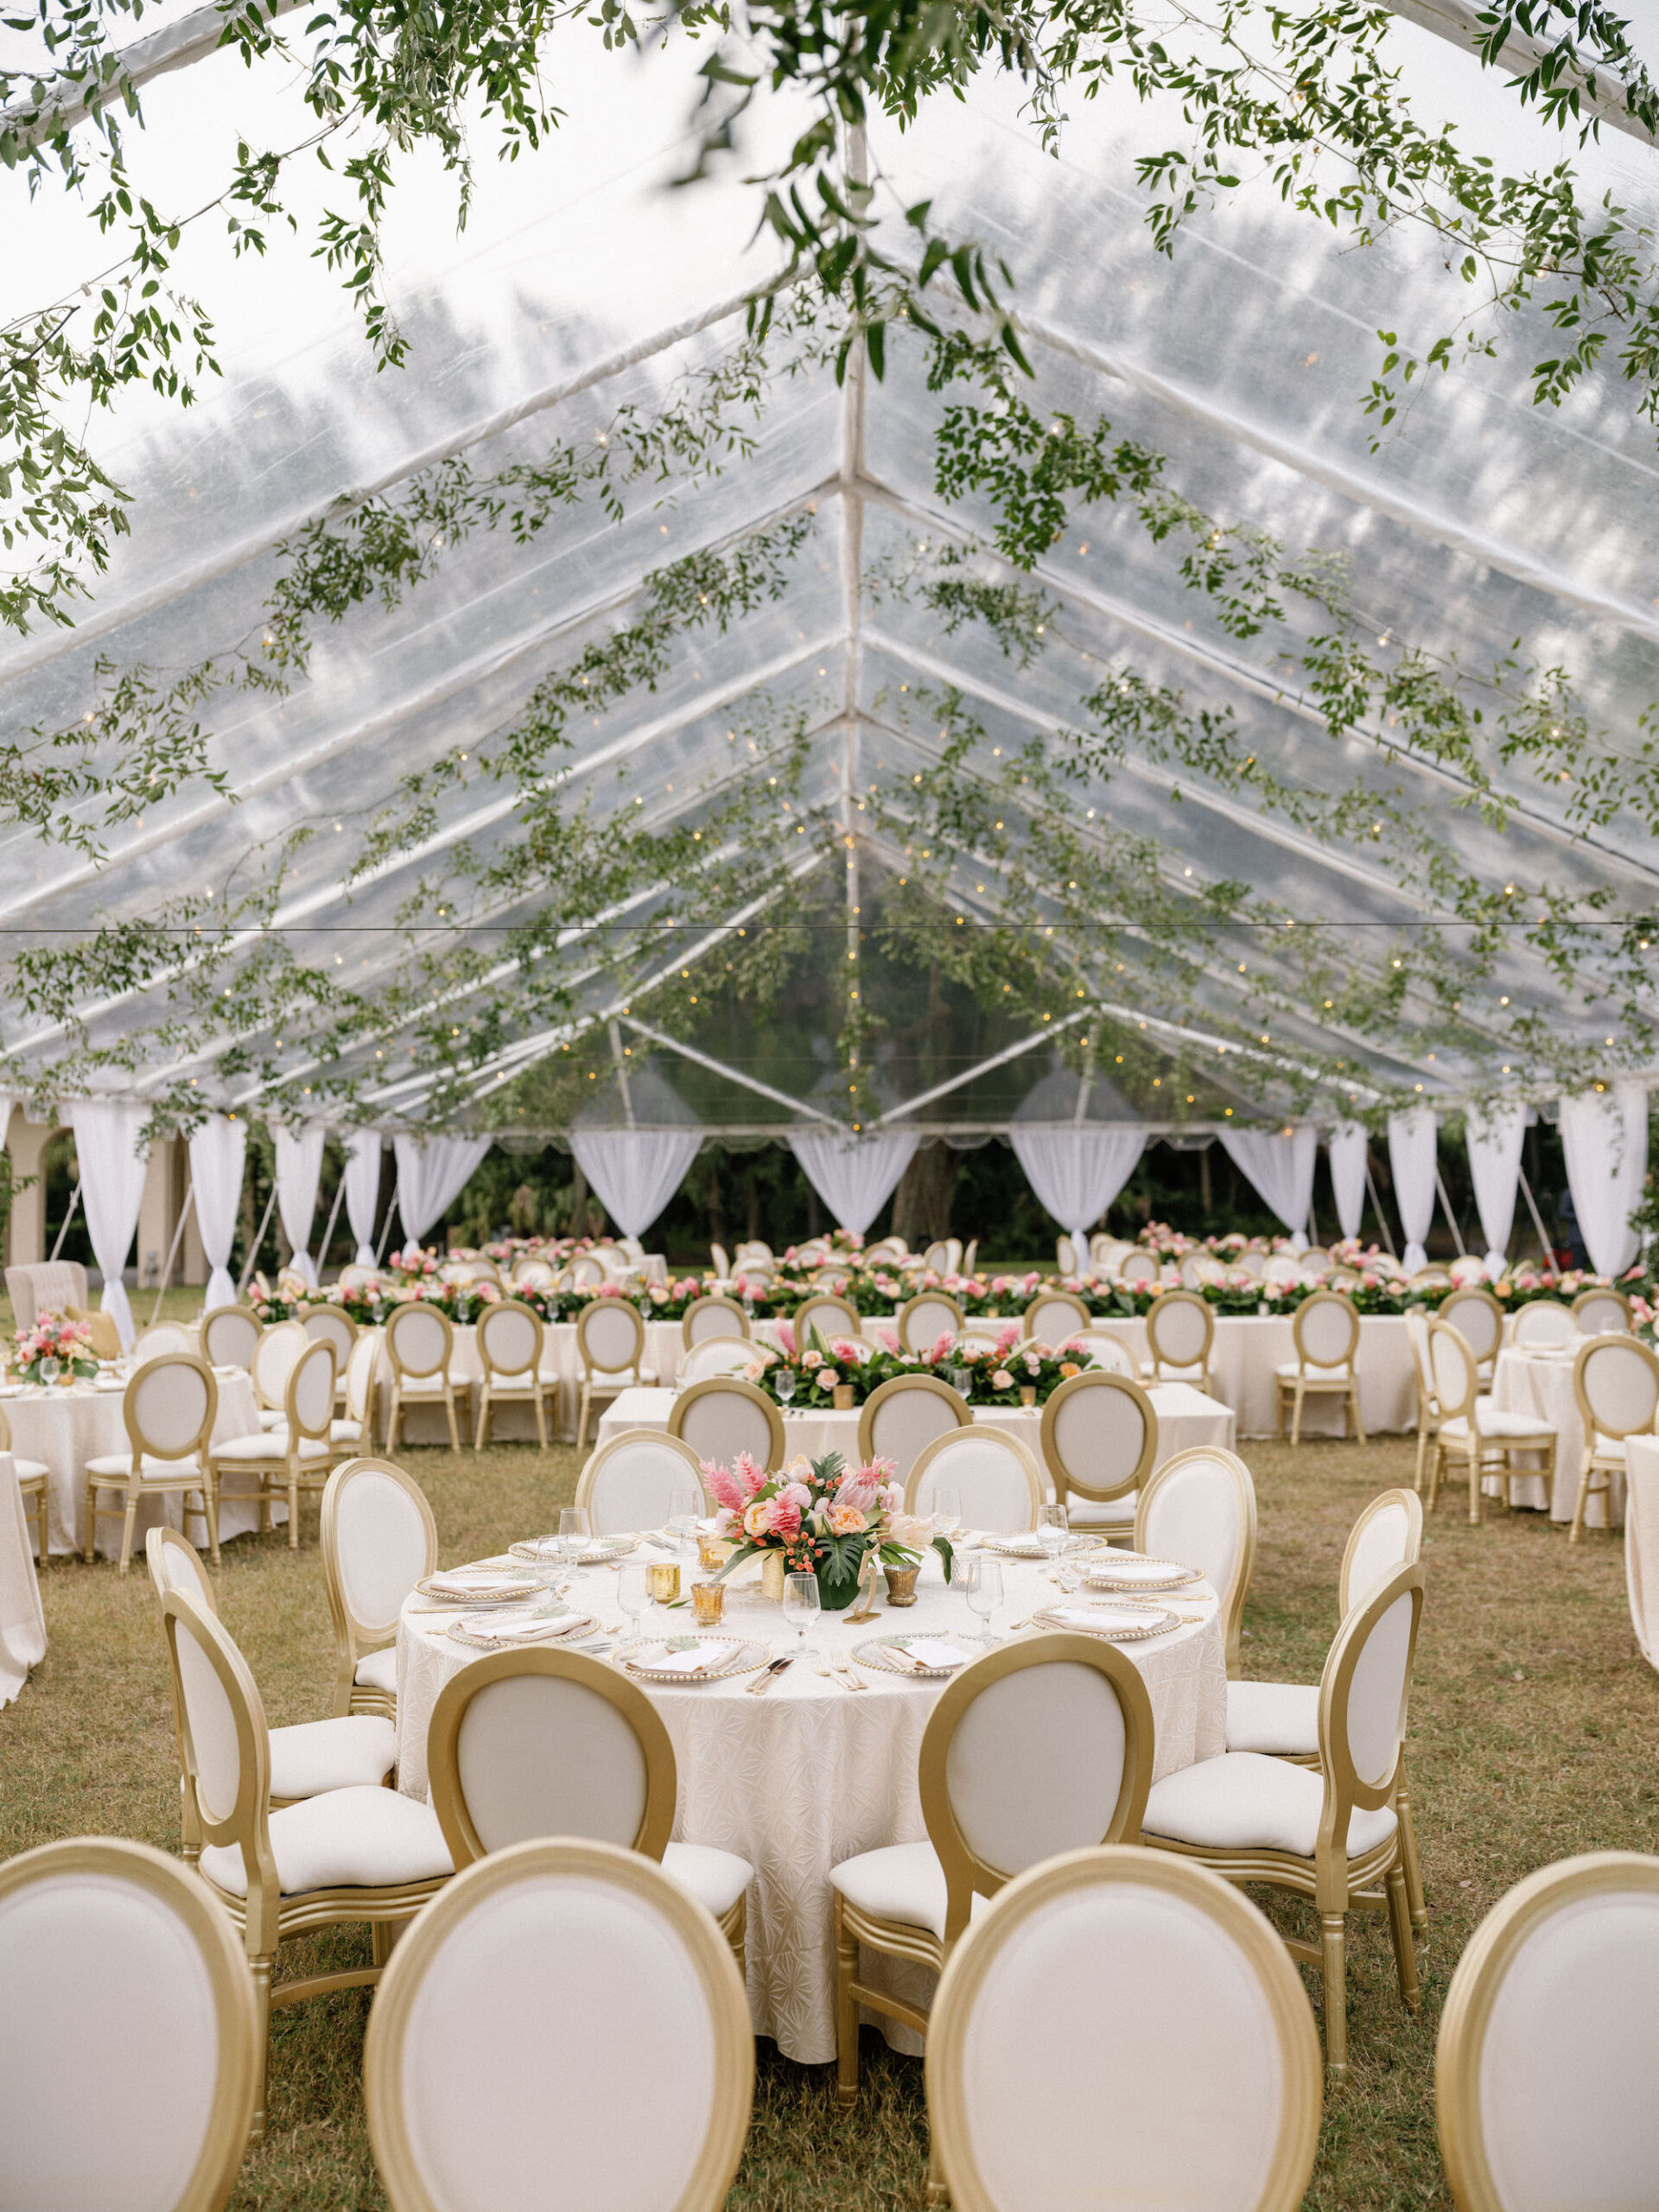 Luxurious Classic Outdoor Tent Wedding Reception Decor, Gold and Ivory Dining Chairs, Low Pink and Peach with Greenery Floral Bouquets, Hanging Greenery Garland, White Linens | Tampa Bay Wedding Venue Powel Crosley Estate | Tampa Bay Wedding Florist Botanica International Design Studio